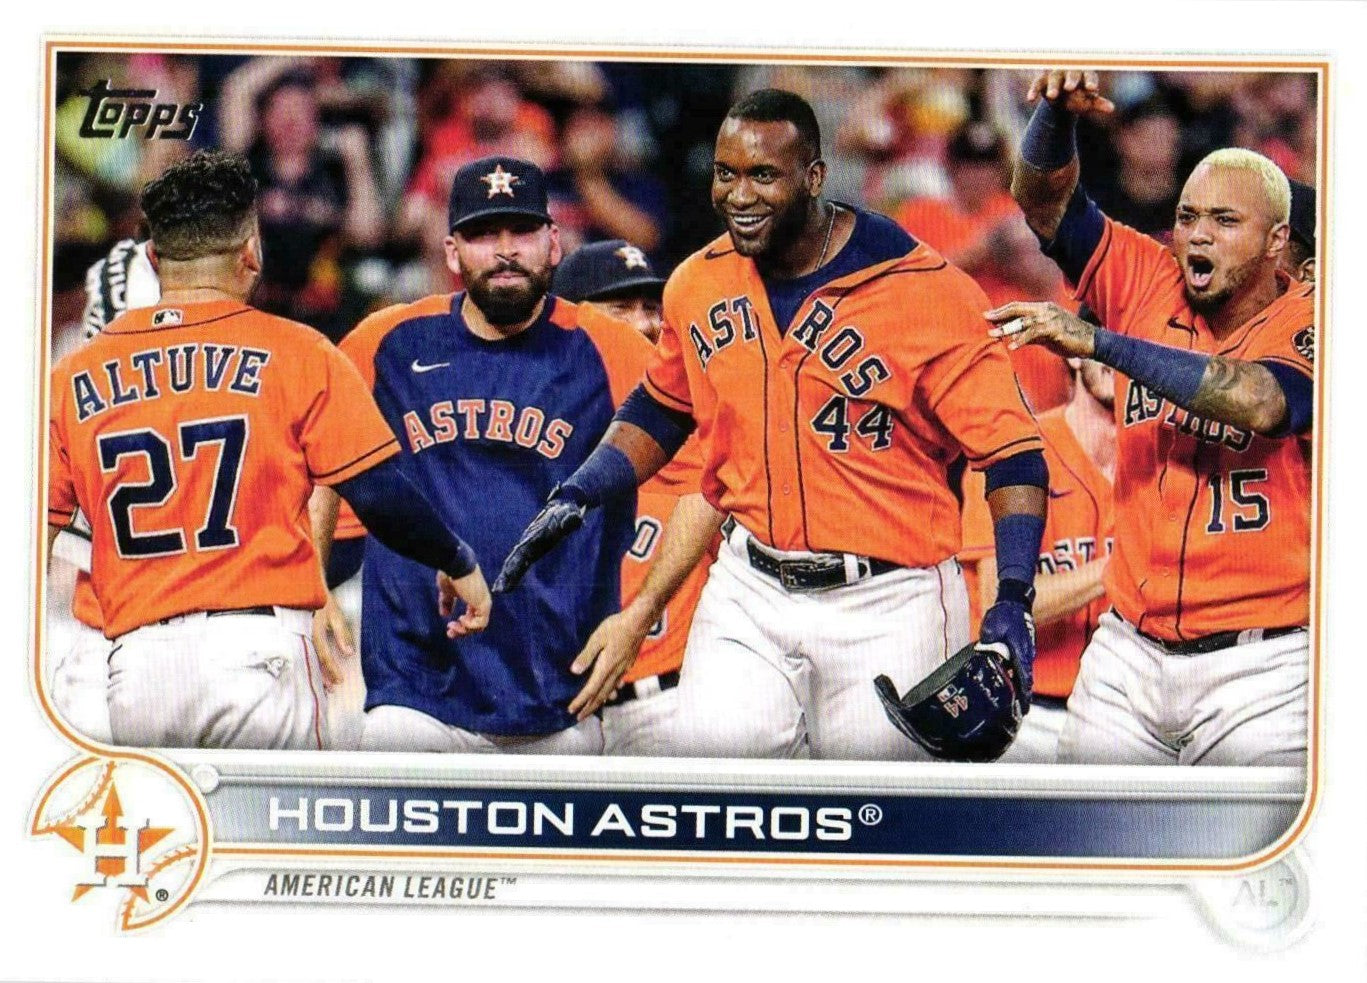 Cards That Never Were: TBT - Houston Astros Edition